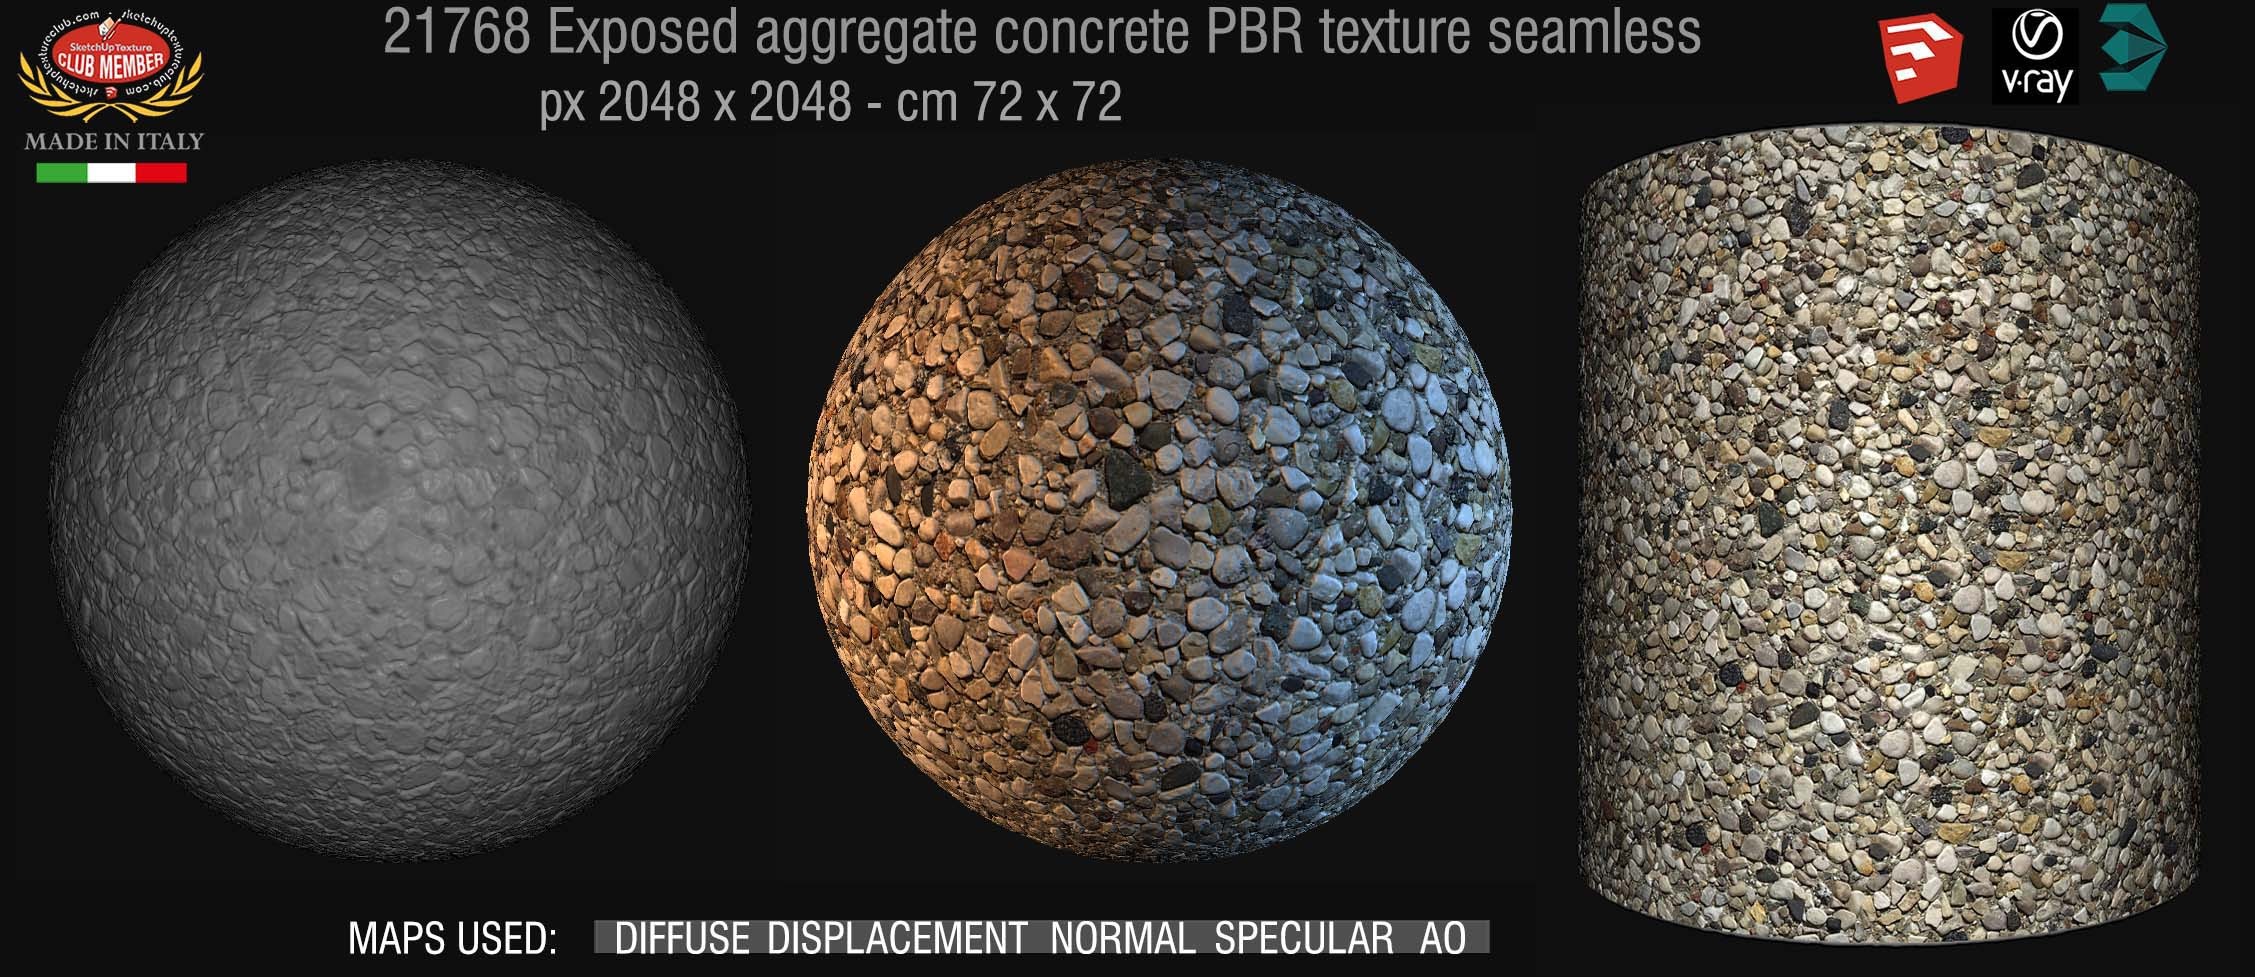 21768 Exposed aggregate concrete PBR texture seamless demo